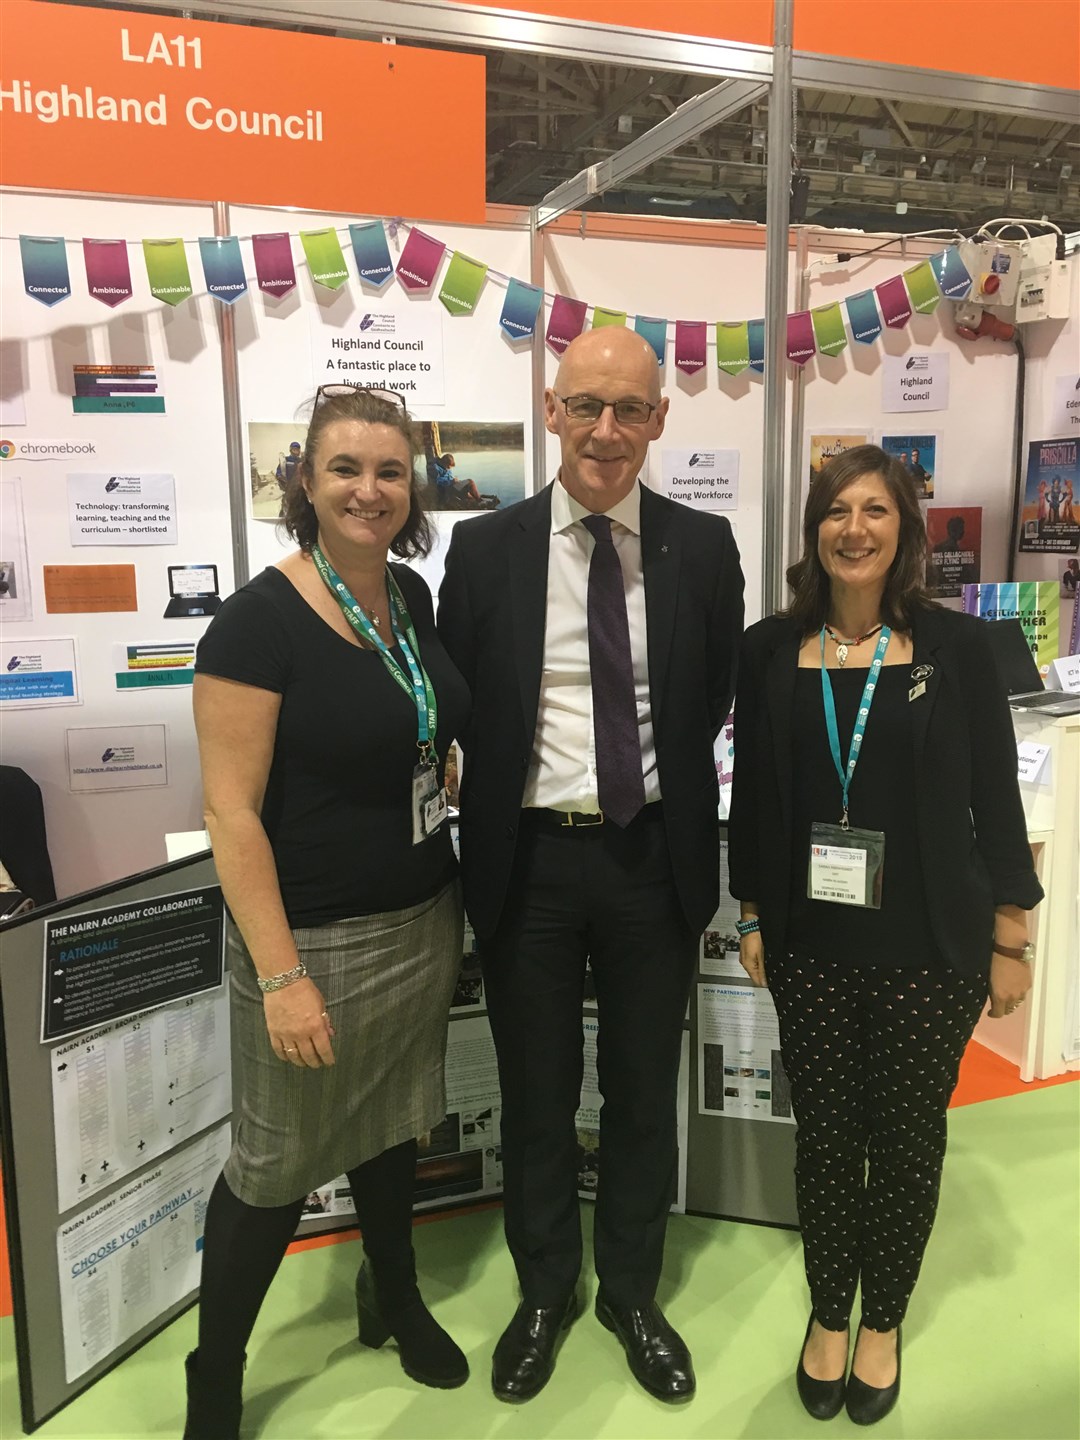 Claire McGonigal (left) with Education Secretary John Swinney at an education conference.